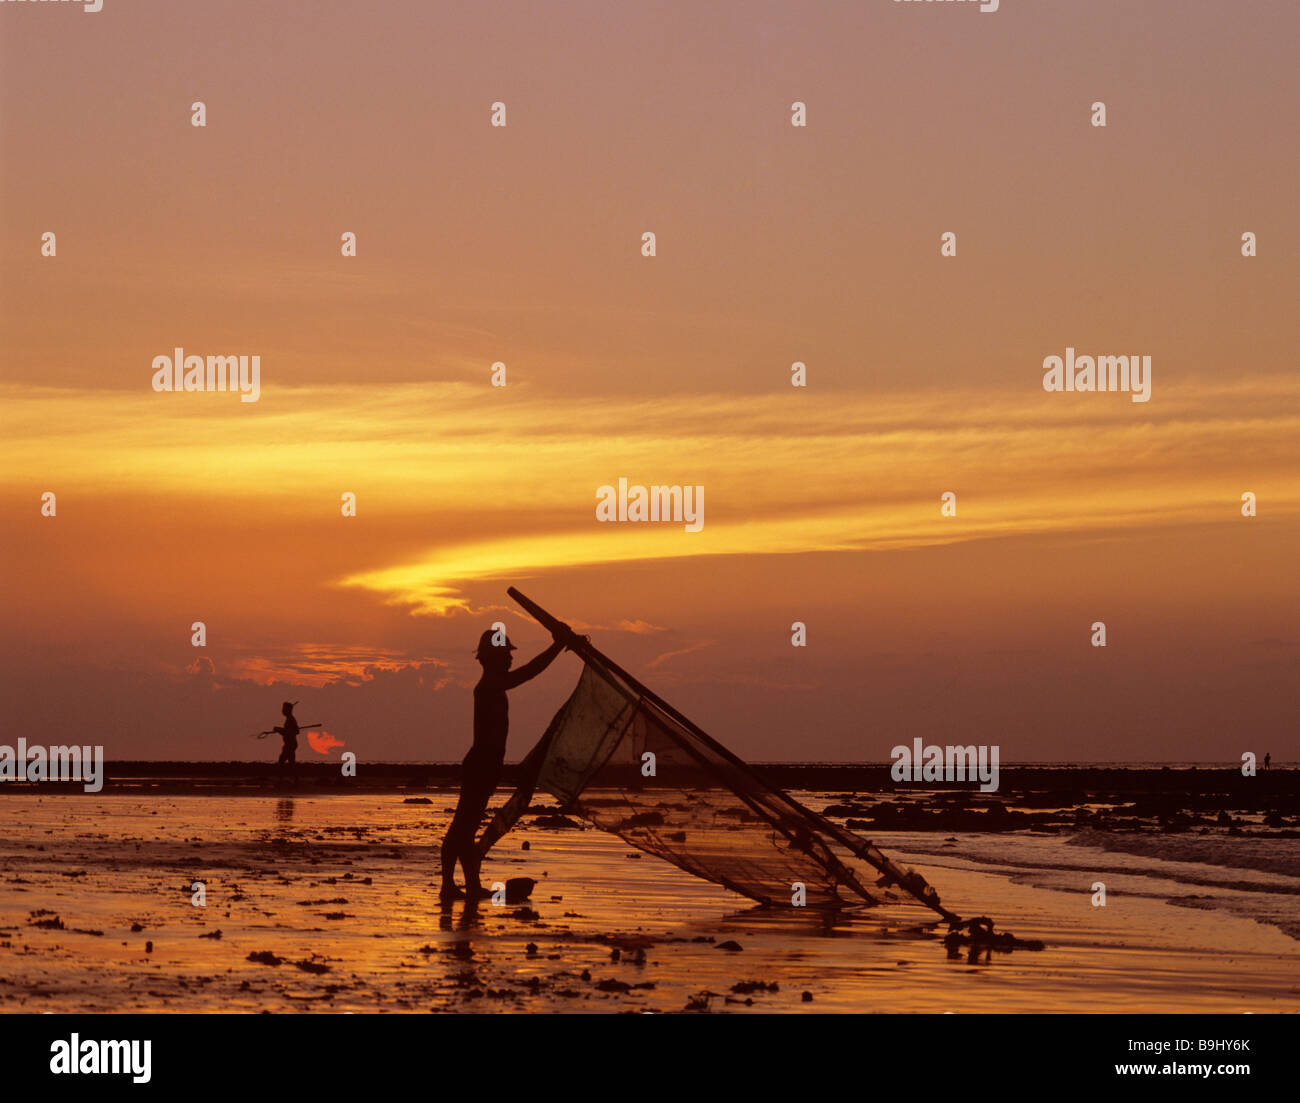 Fisherman with a net, ocean, evening light, Bali, Indonesia, south-east Asia Stock Photo